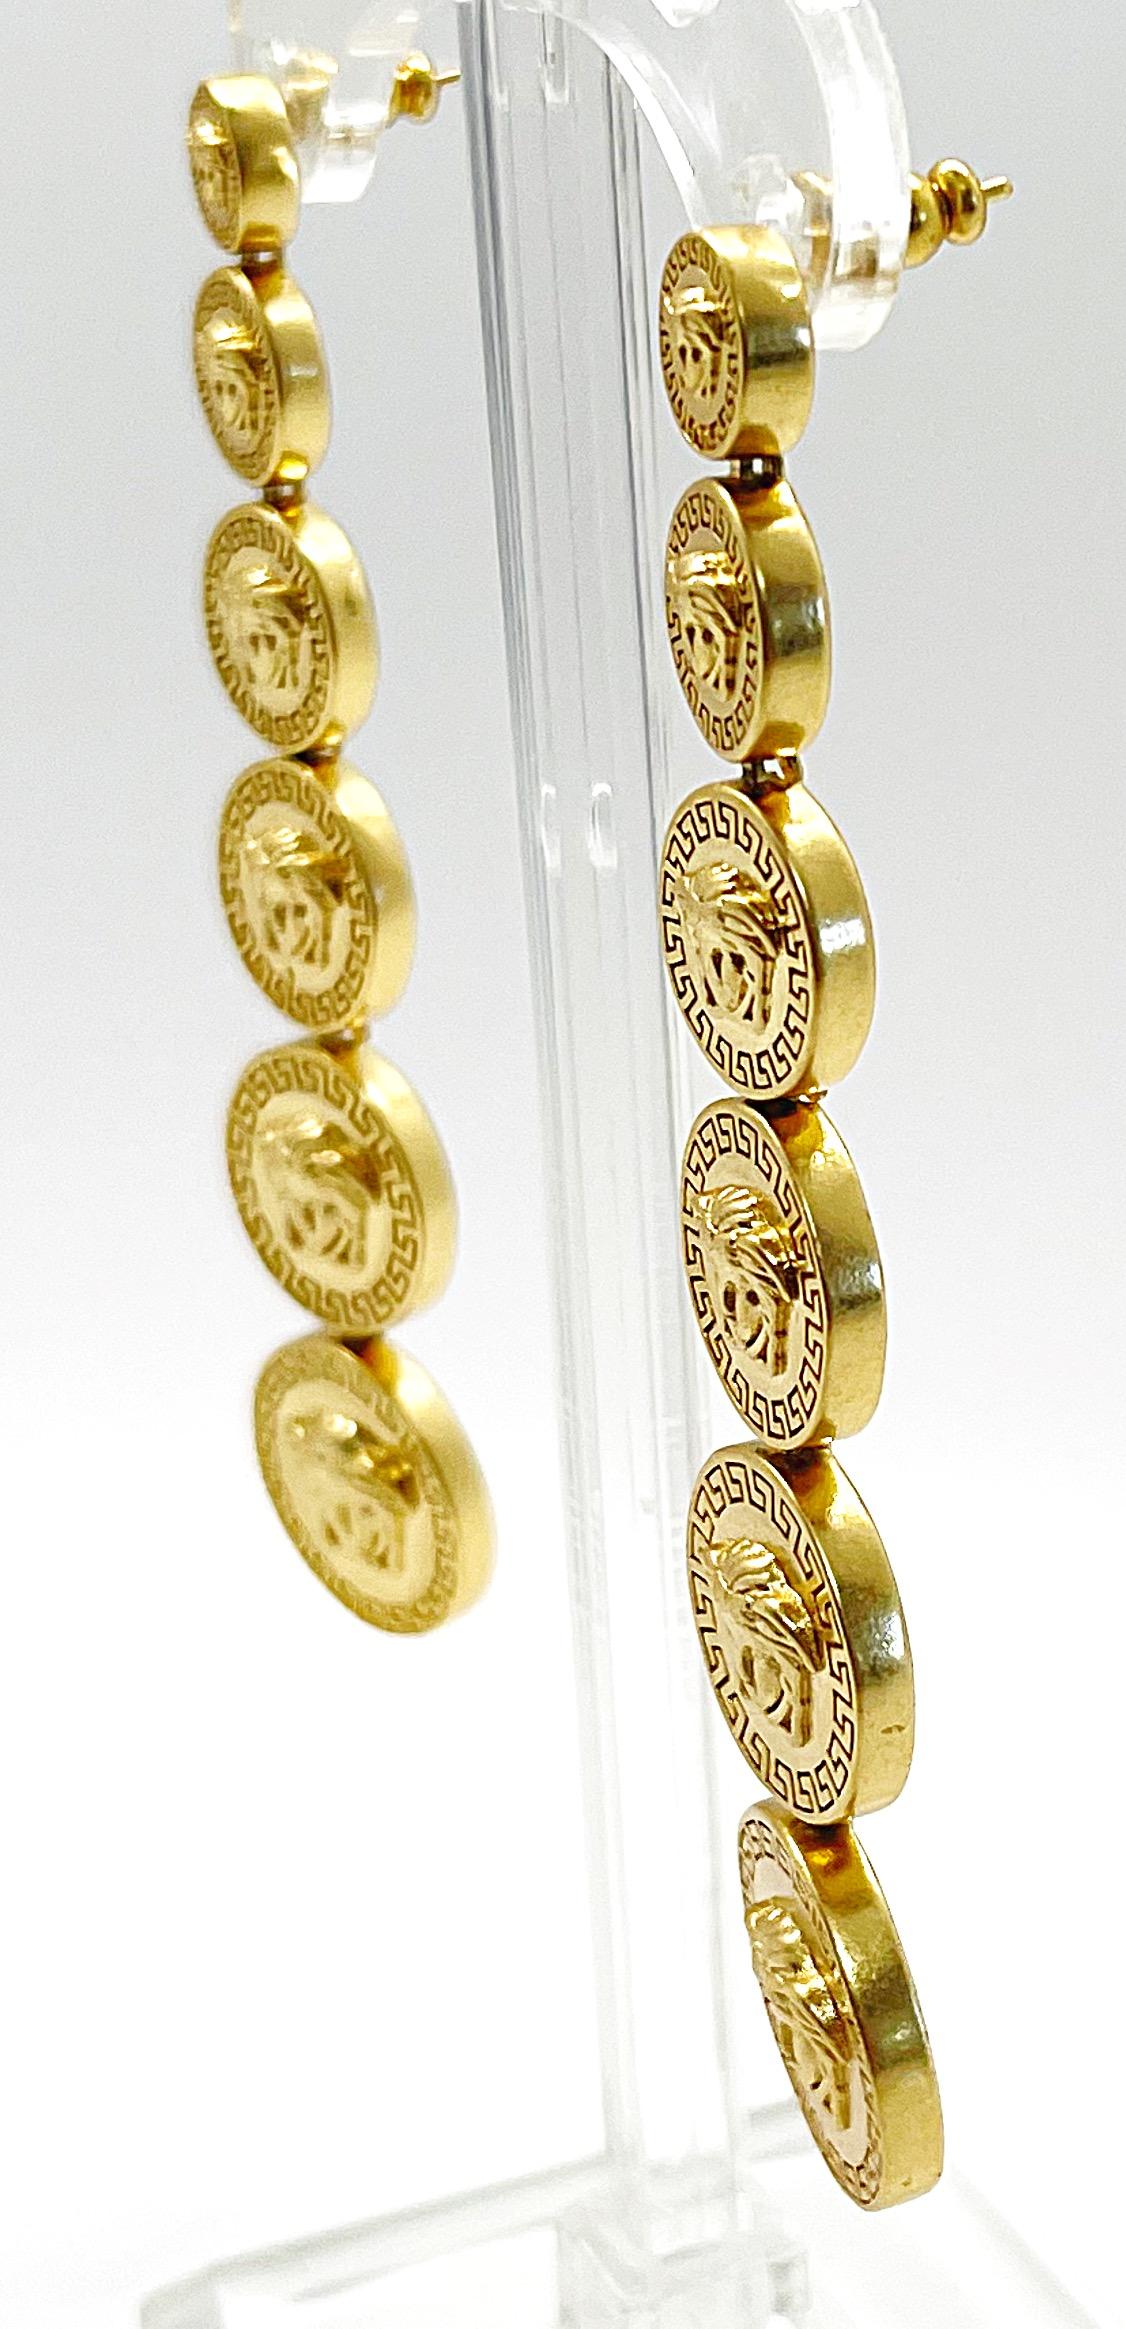 Iconic never worn GIANNI VERSACE gold Medusa head embossed dangle pierced back earrings. Each earring features 6 discs. Pierced back. Can easily be dressed up or down.
In great unworn condition
Made in Italy
Measures 3.5 inches long  